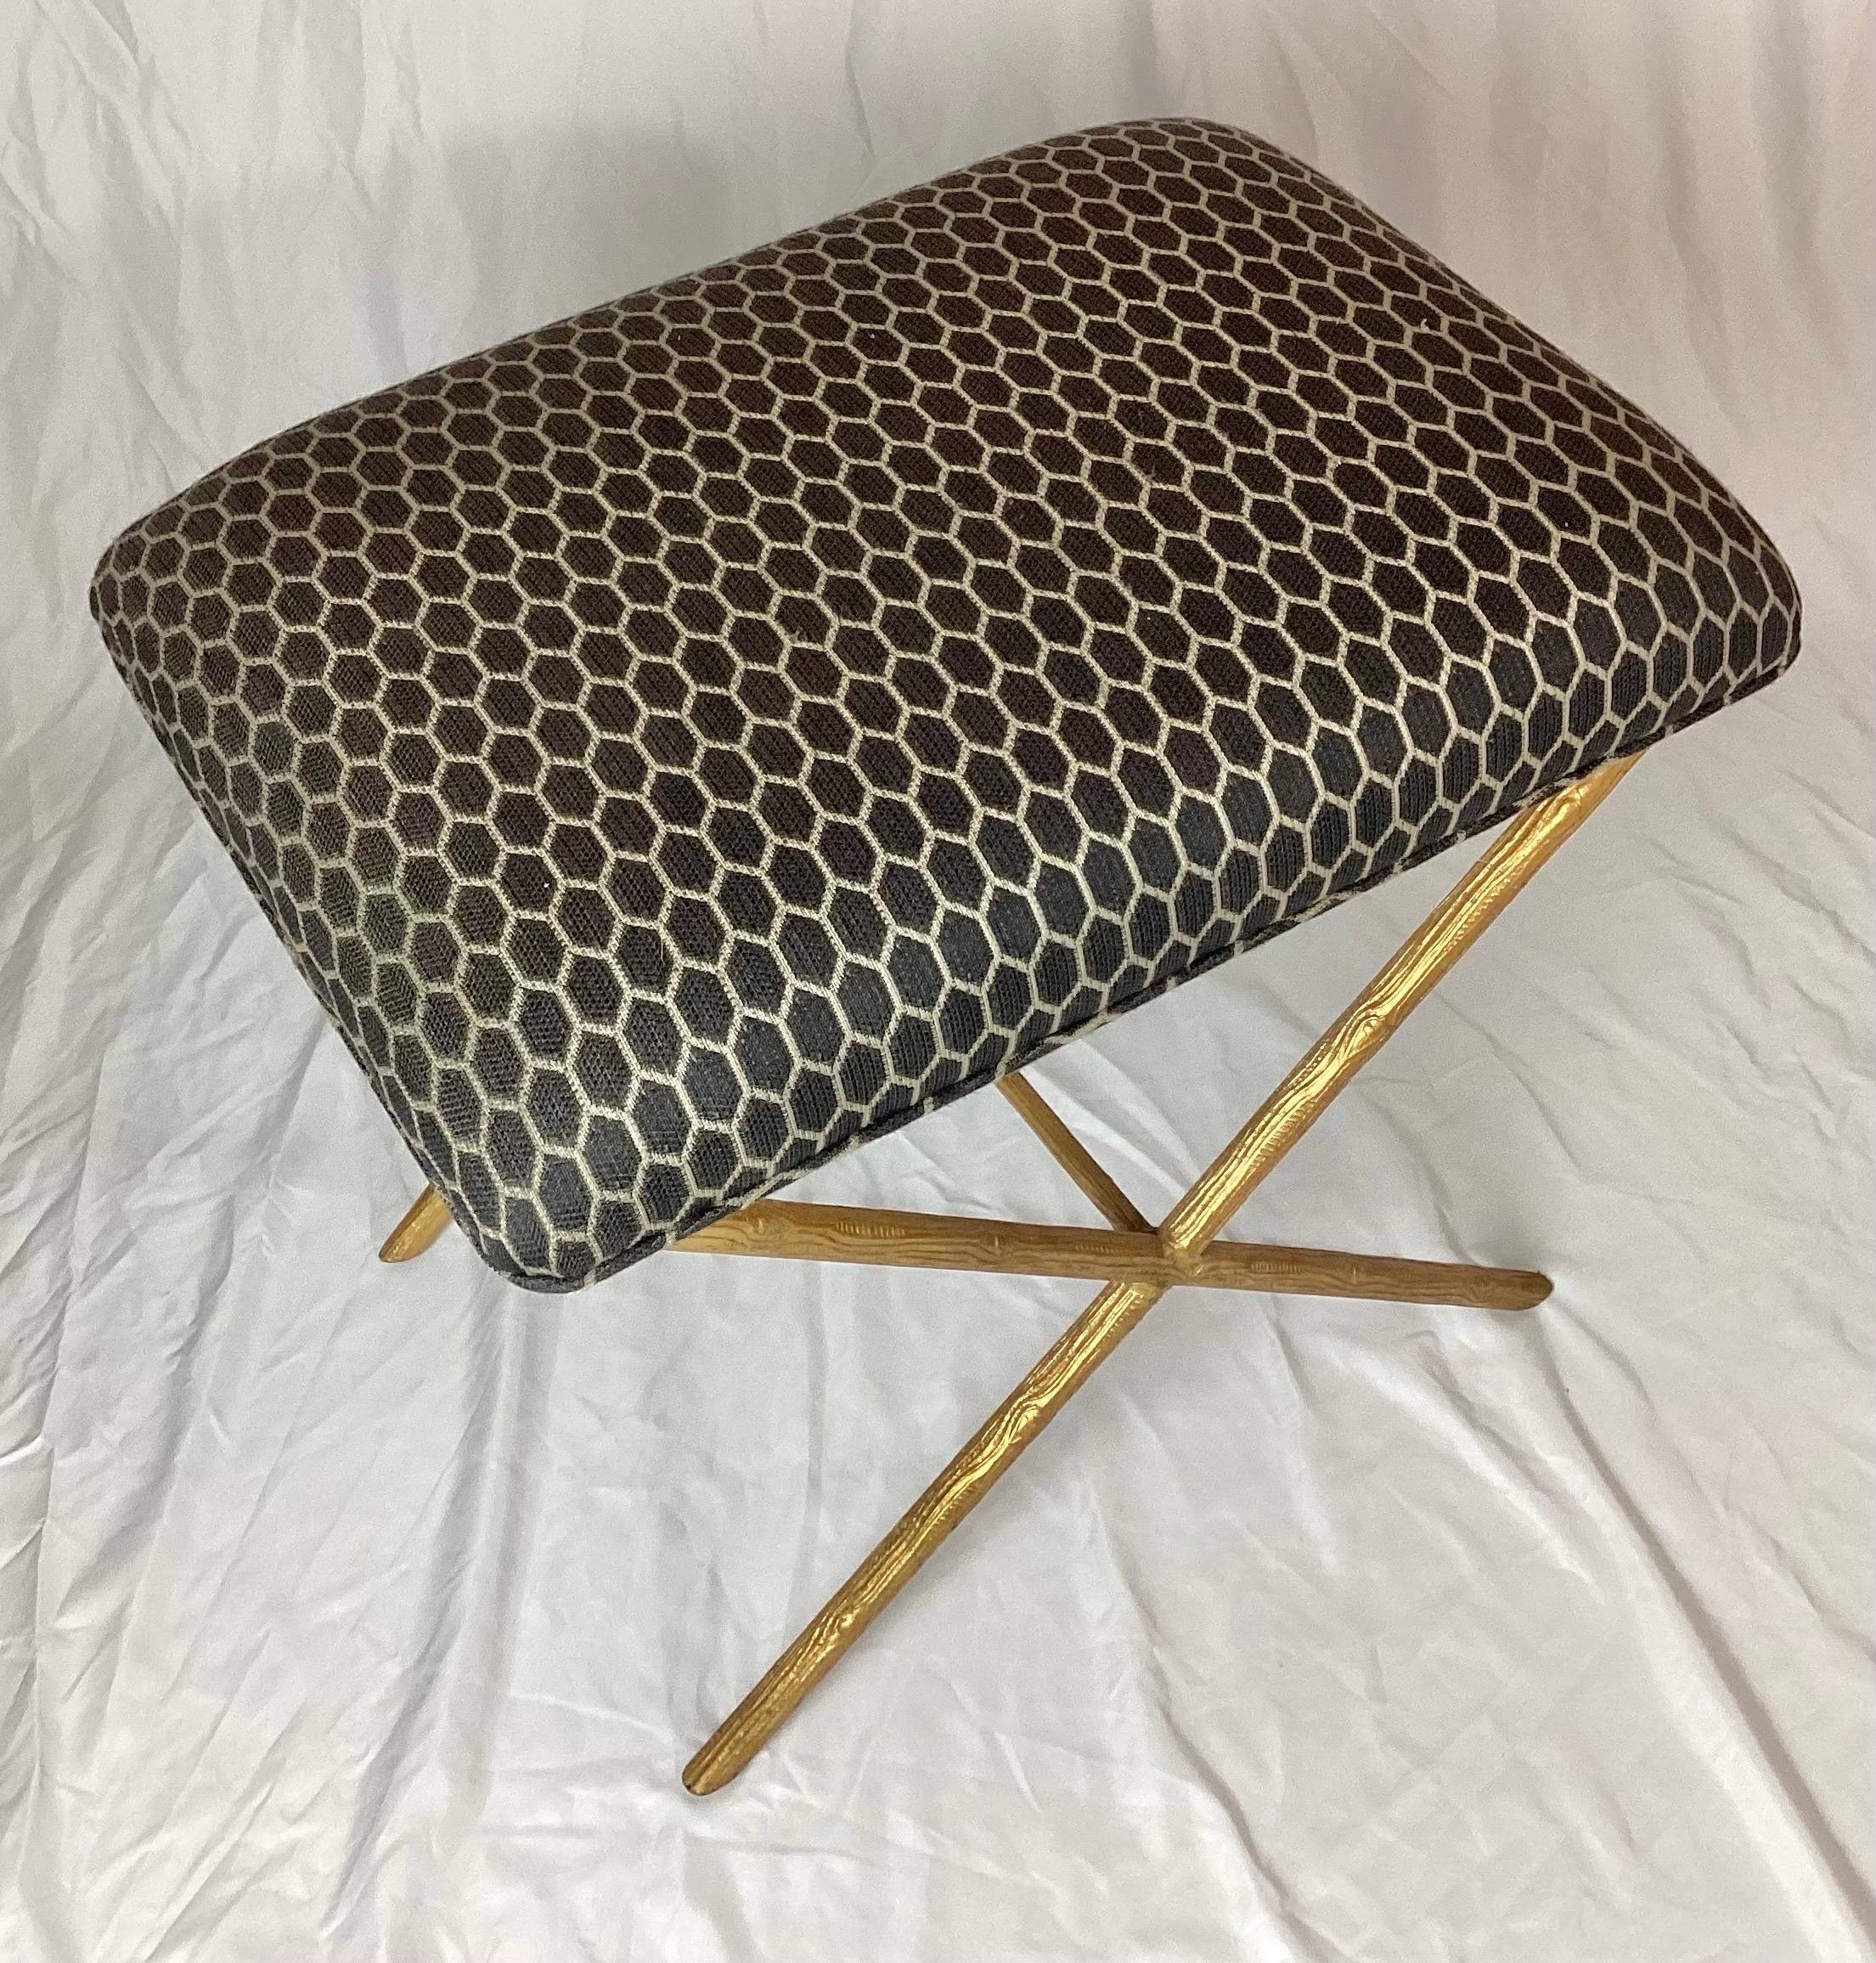 Hollywood Regency Faux Tree Bark X-Base stool bench or ottoman. Base is cold painted gold with a handsome gray diamond pattern fabric. Minor age appropriate wear to gold on tips of feet.